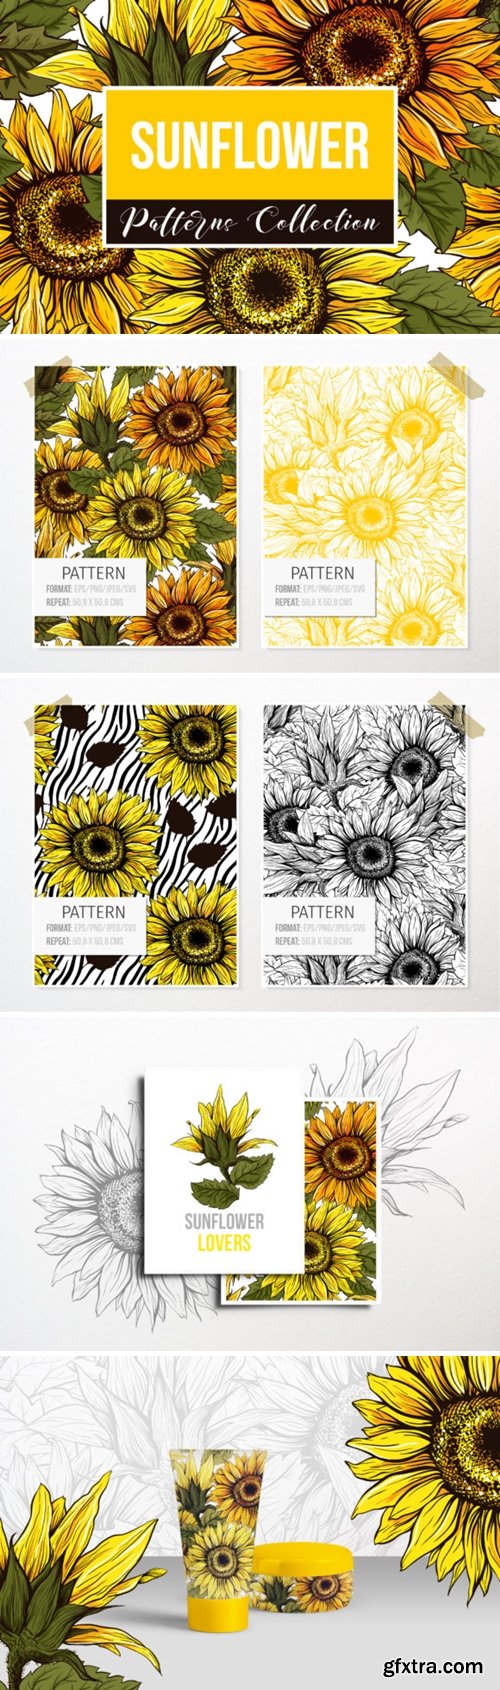 Sunflower Patterns Collection 1701452